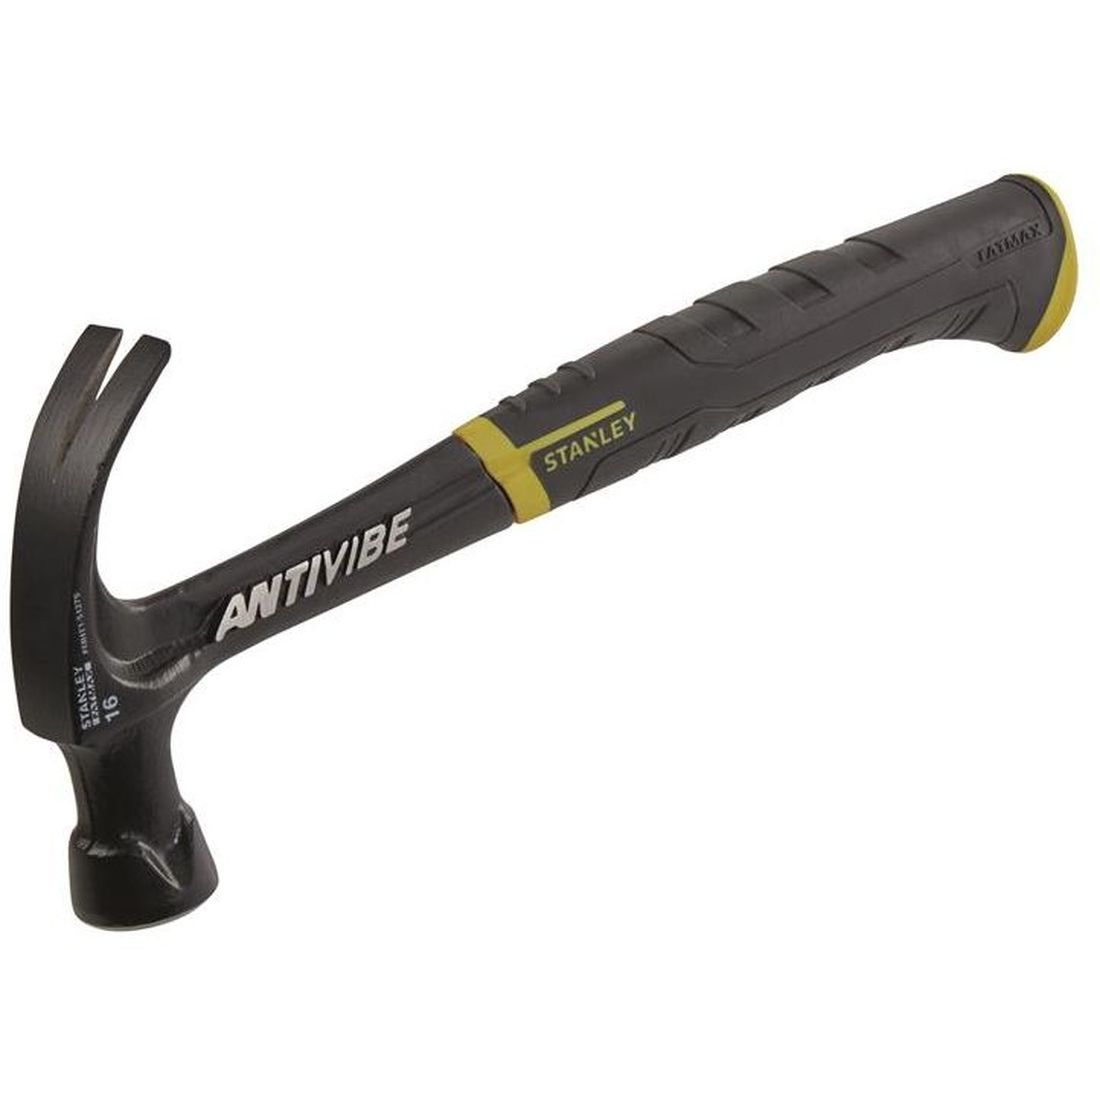 STANLEY FatMax AntiVibe All Steel Curved Claw Hammer 450g (16oz)                       